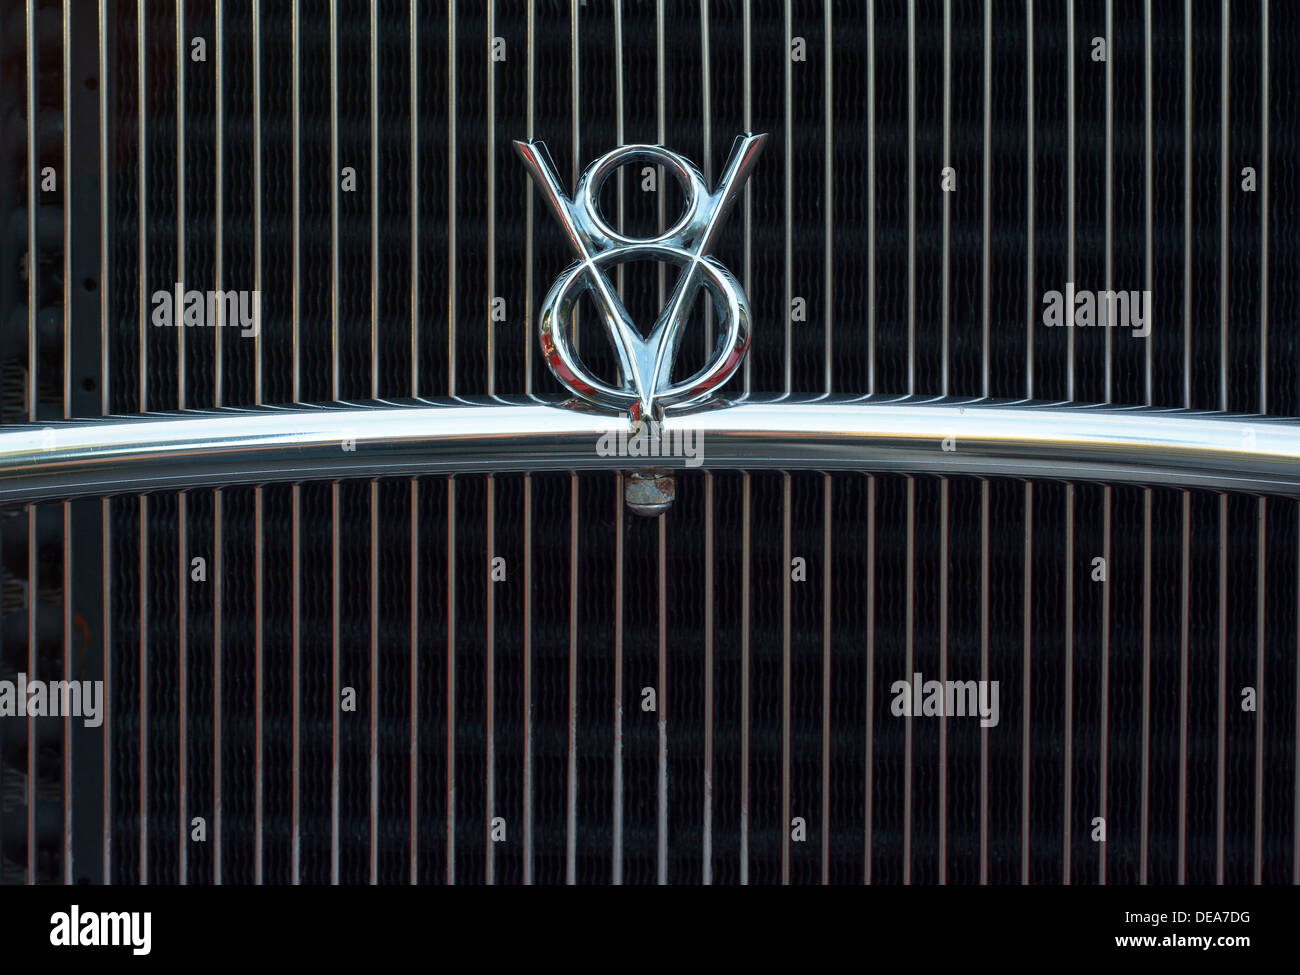 V8 Symbol on the Grill of a Hotrod Stock Photo